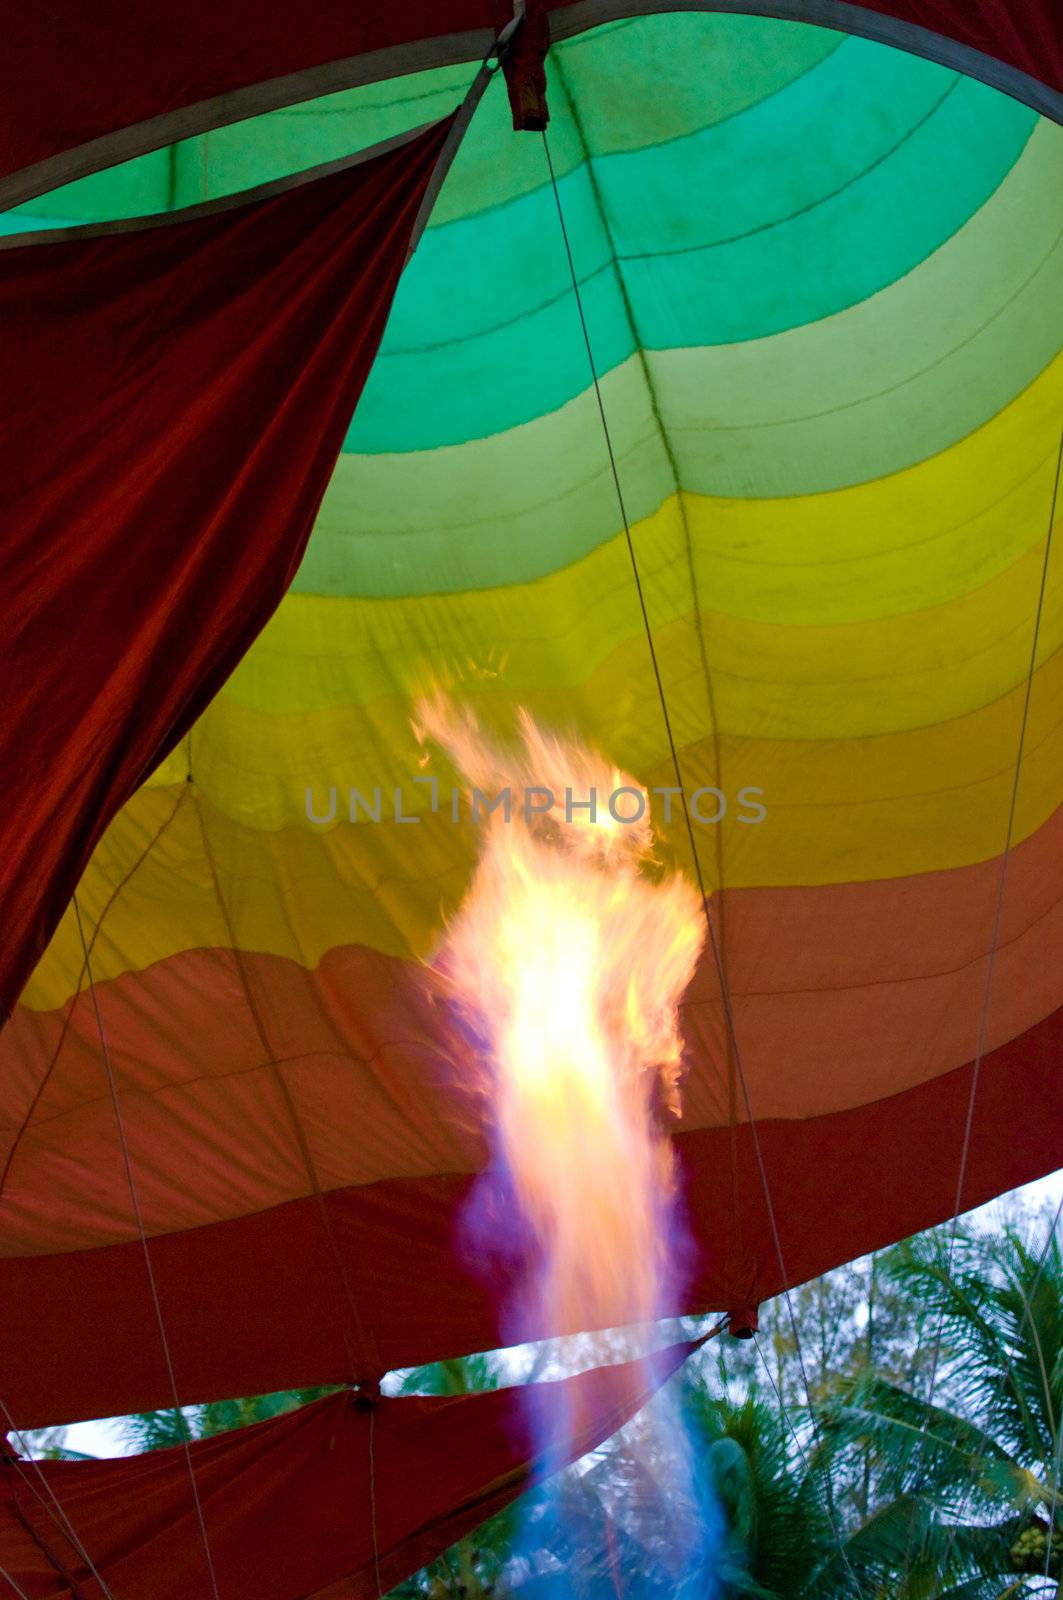 CHIANG MAI, THAILAND - NOV 26 : Participants blow up their balloons in the International Balloon Festival on November 26,2011 at the Prince Royal's College in Chiang Mai Thailand.